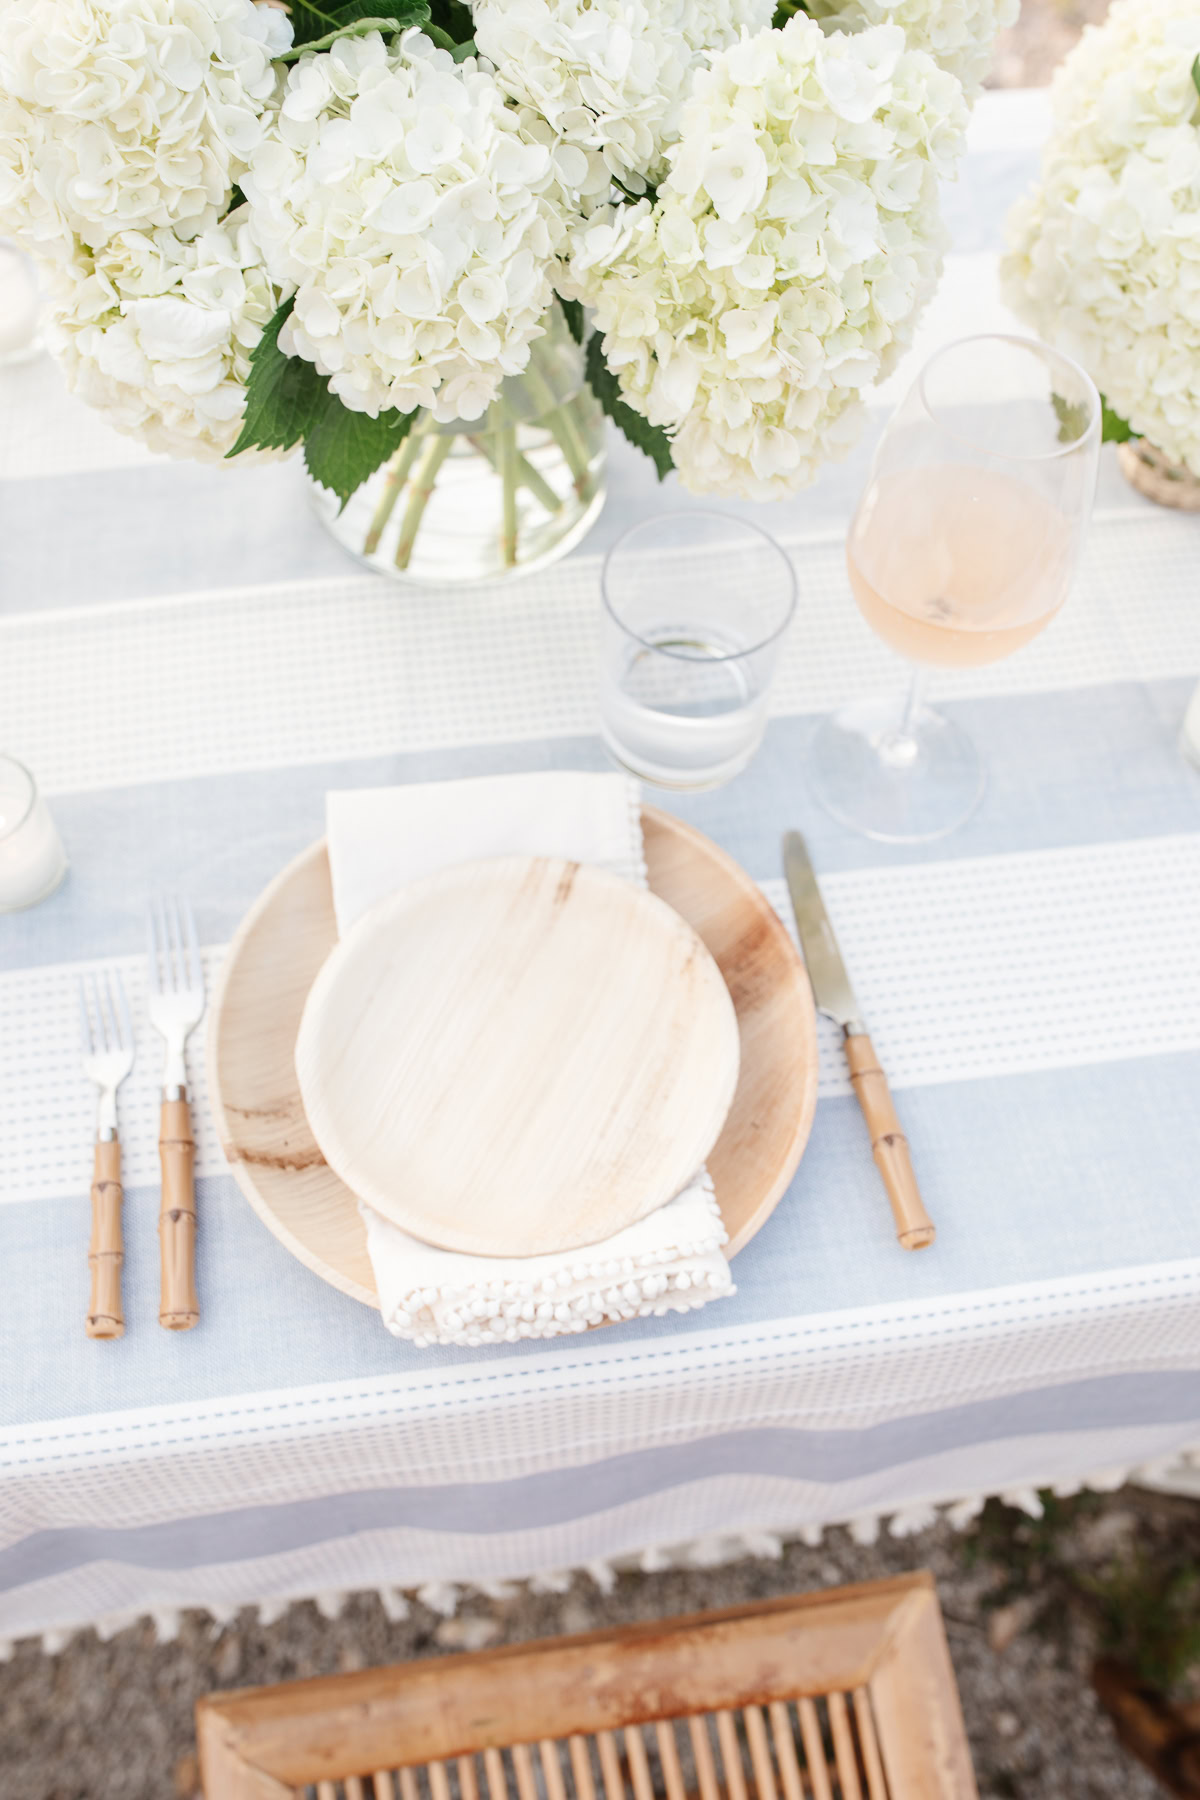 Elegant table setting with a wooden plate, silverware with bamboo handles, a glass of rosé wine, and white hydrangea flower arrangements.